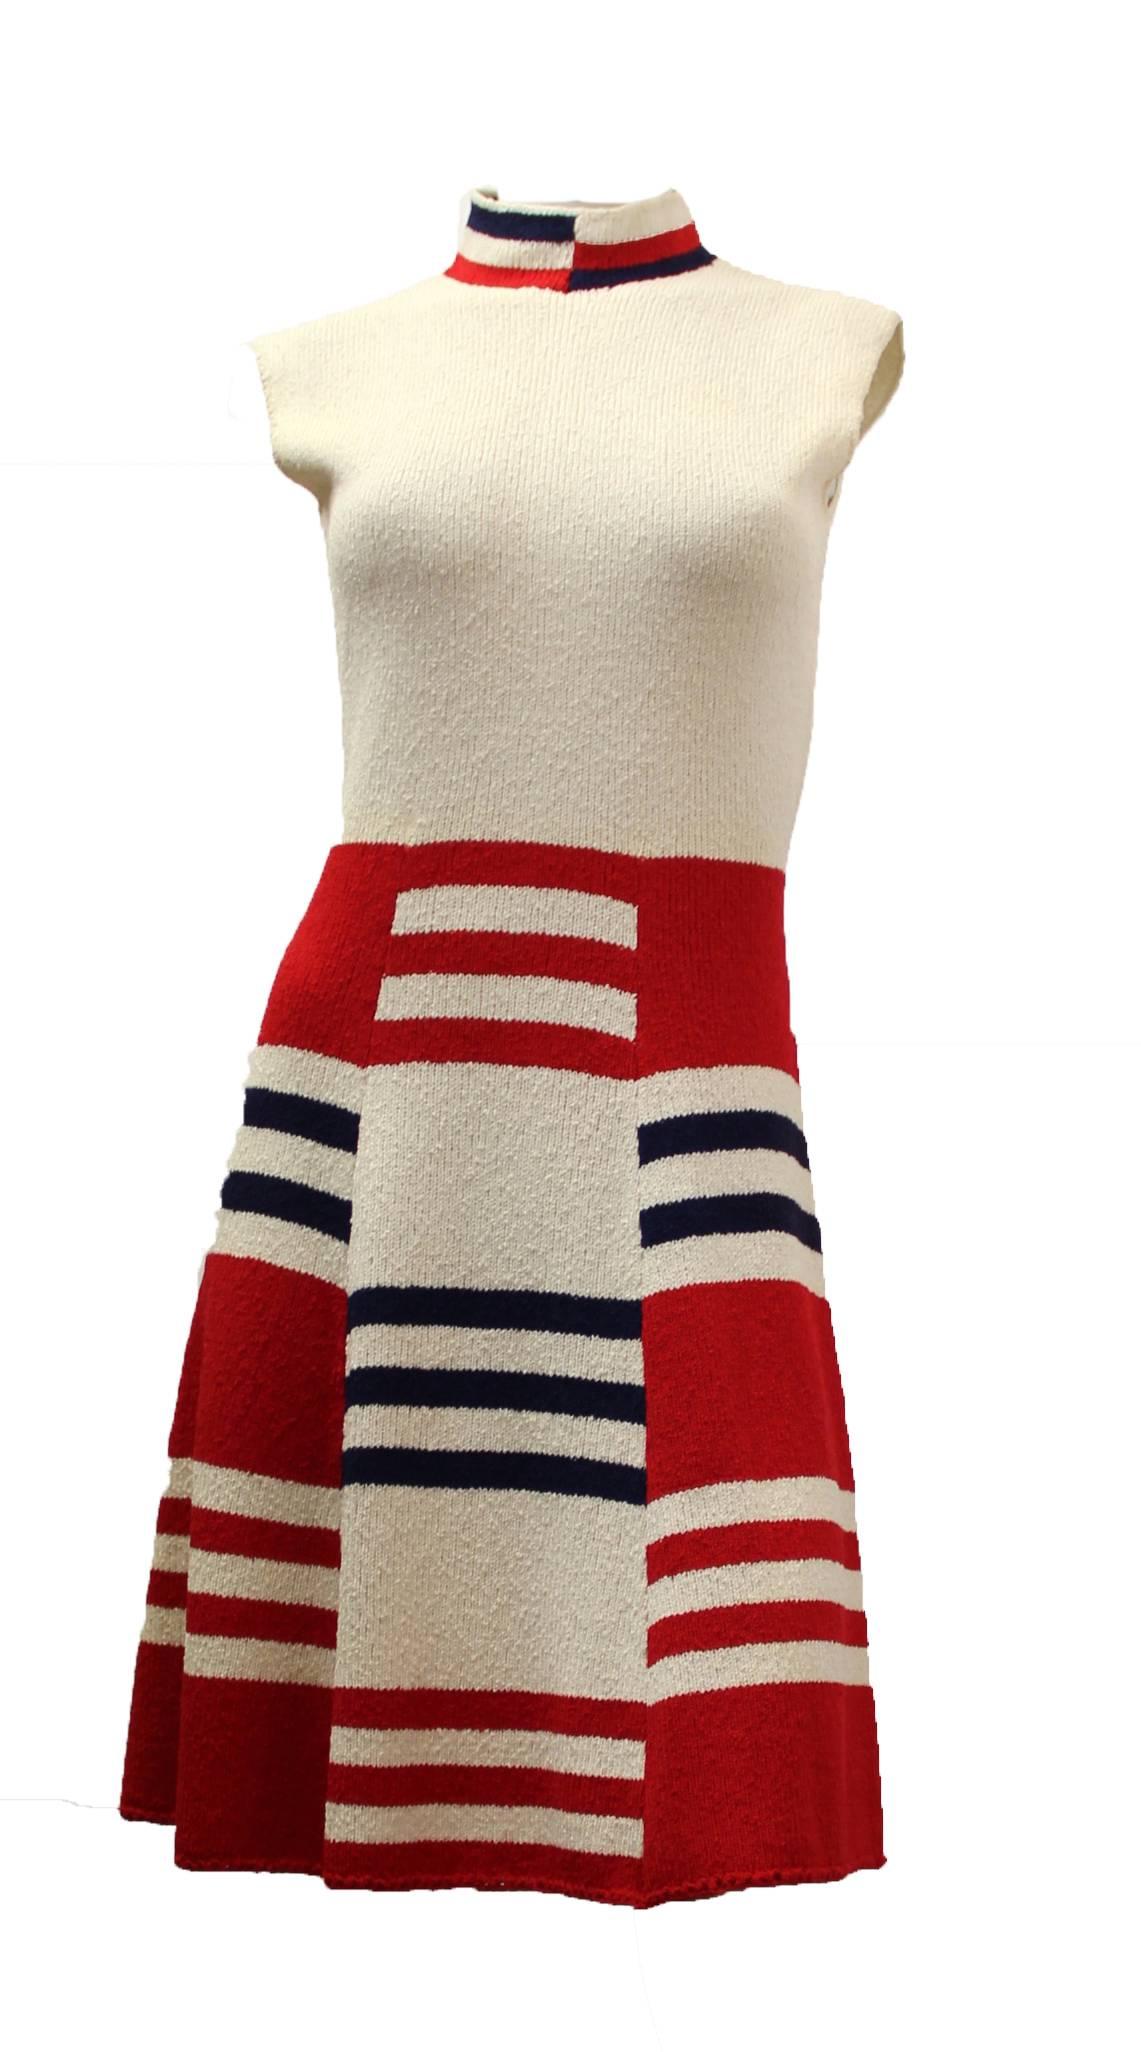 1960s red white and blue Mod knit dress. Zips up the back 

Measurements:
Bust: 36